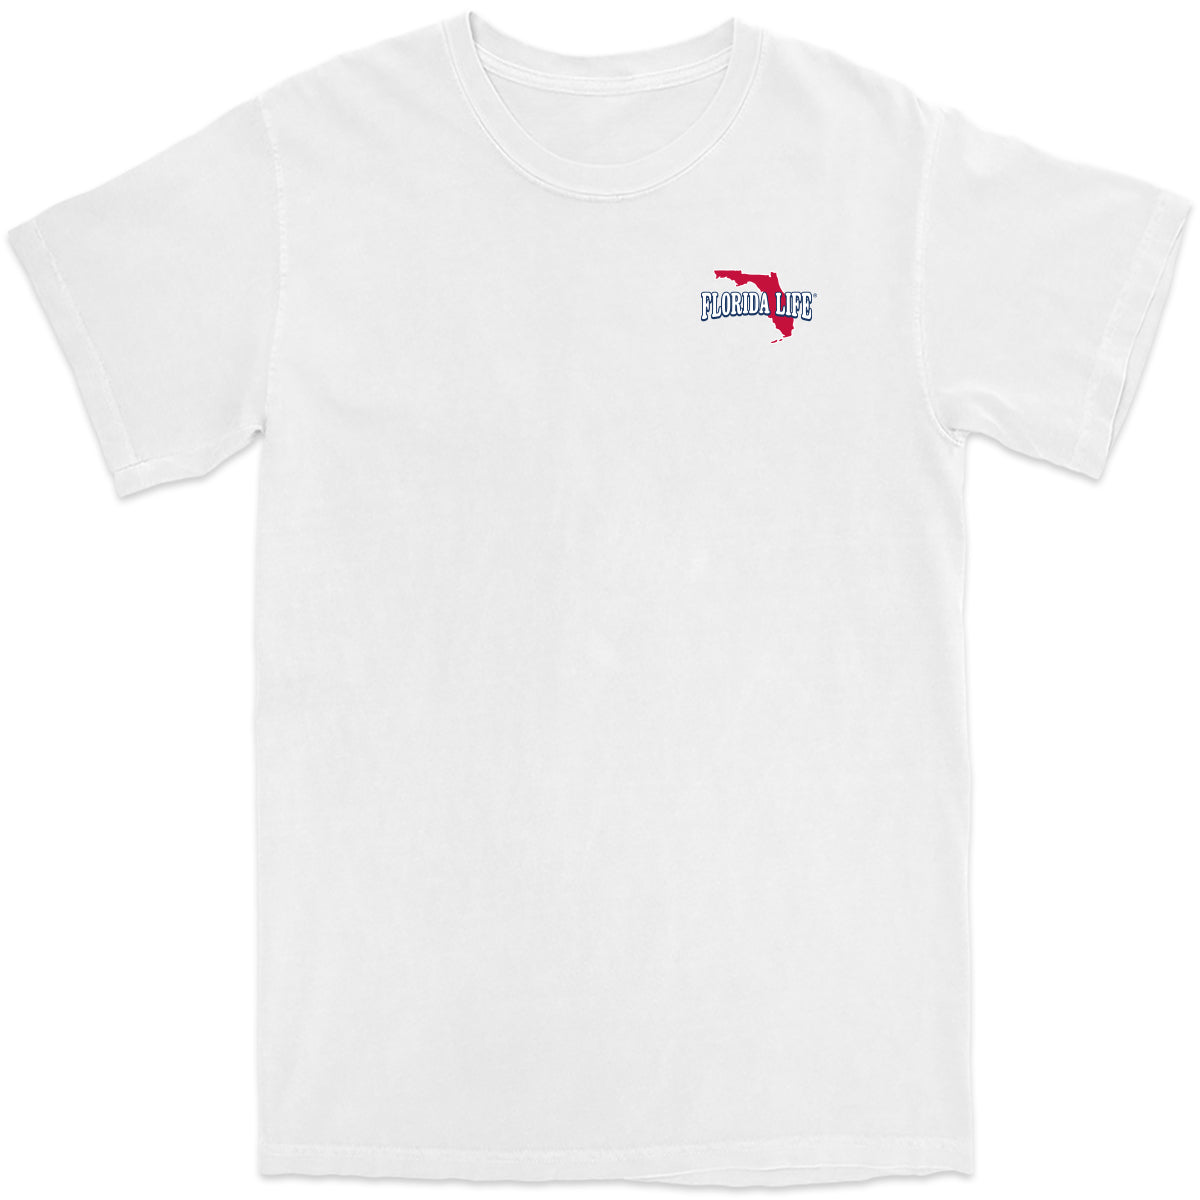 Triple Time Boating T-Shirt White